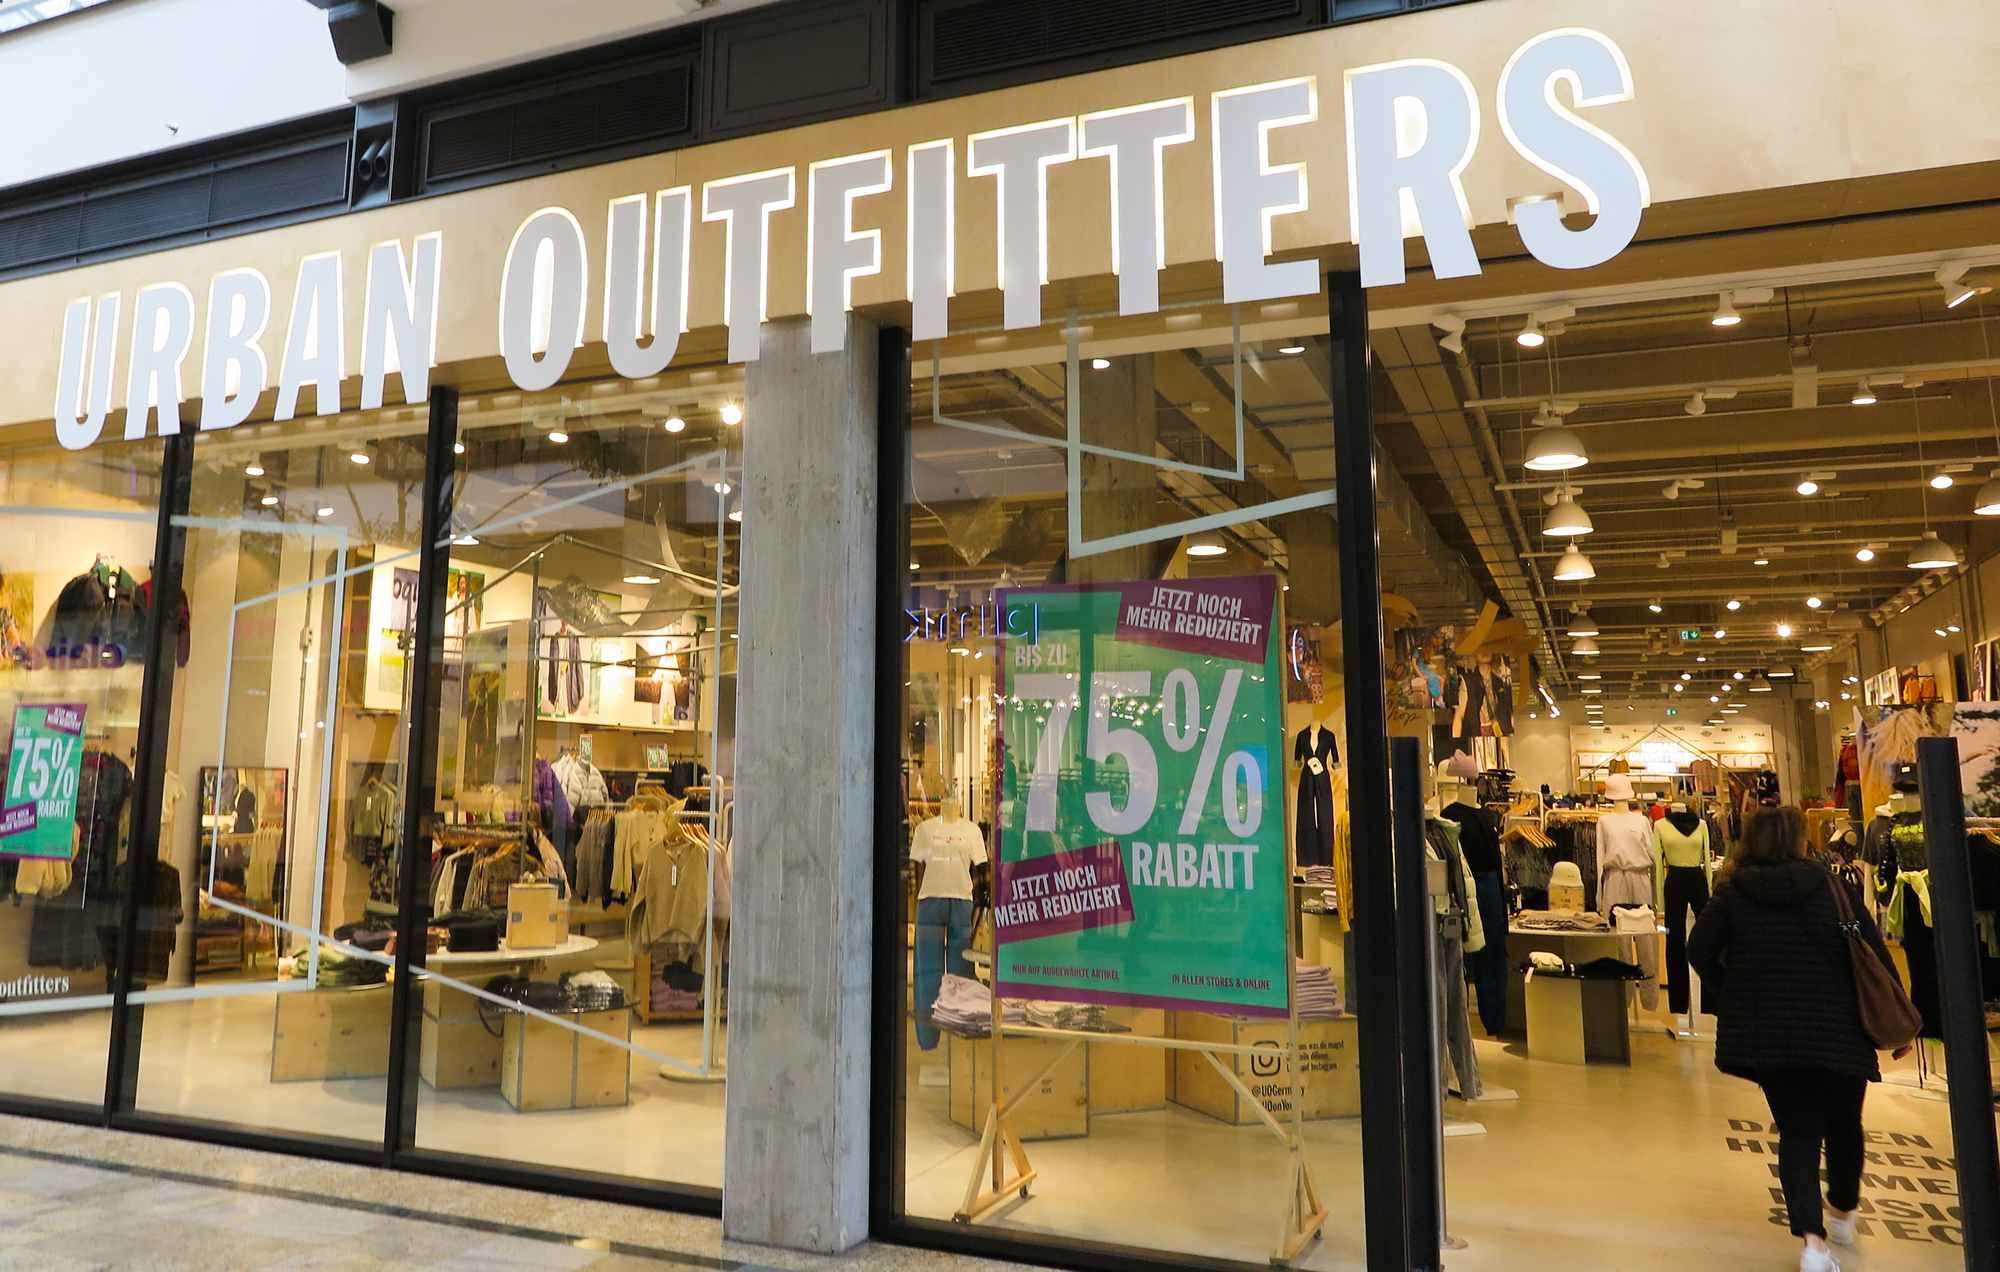 A lawsuit has been filed against Urban Outfitters over a toxic journal.